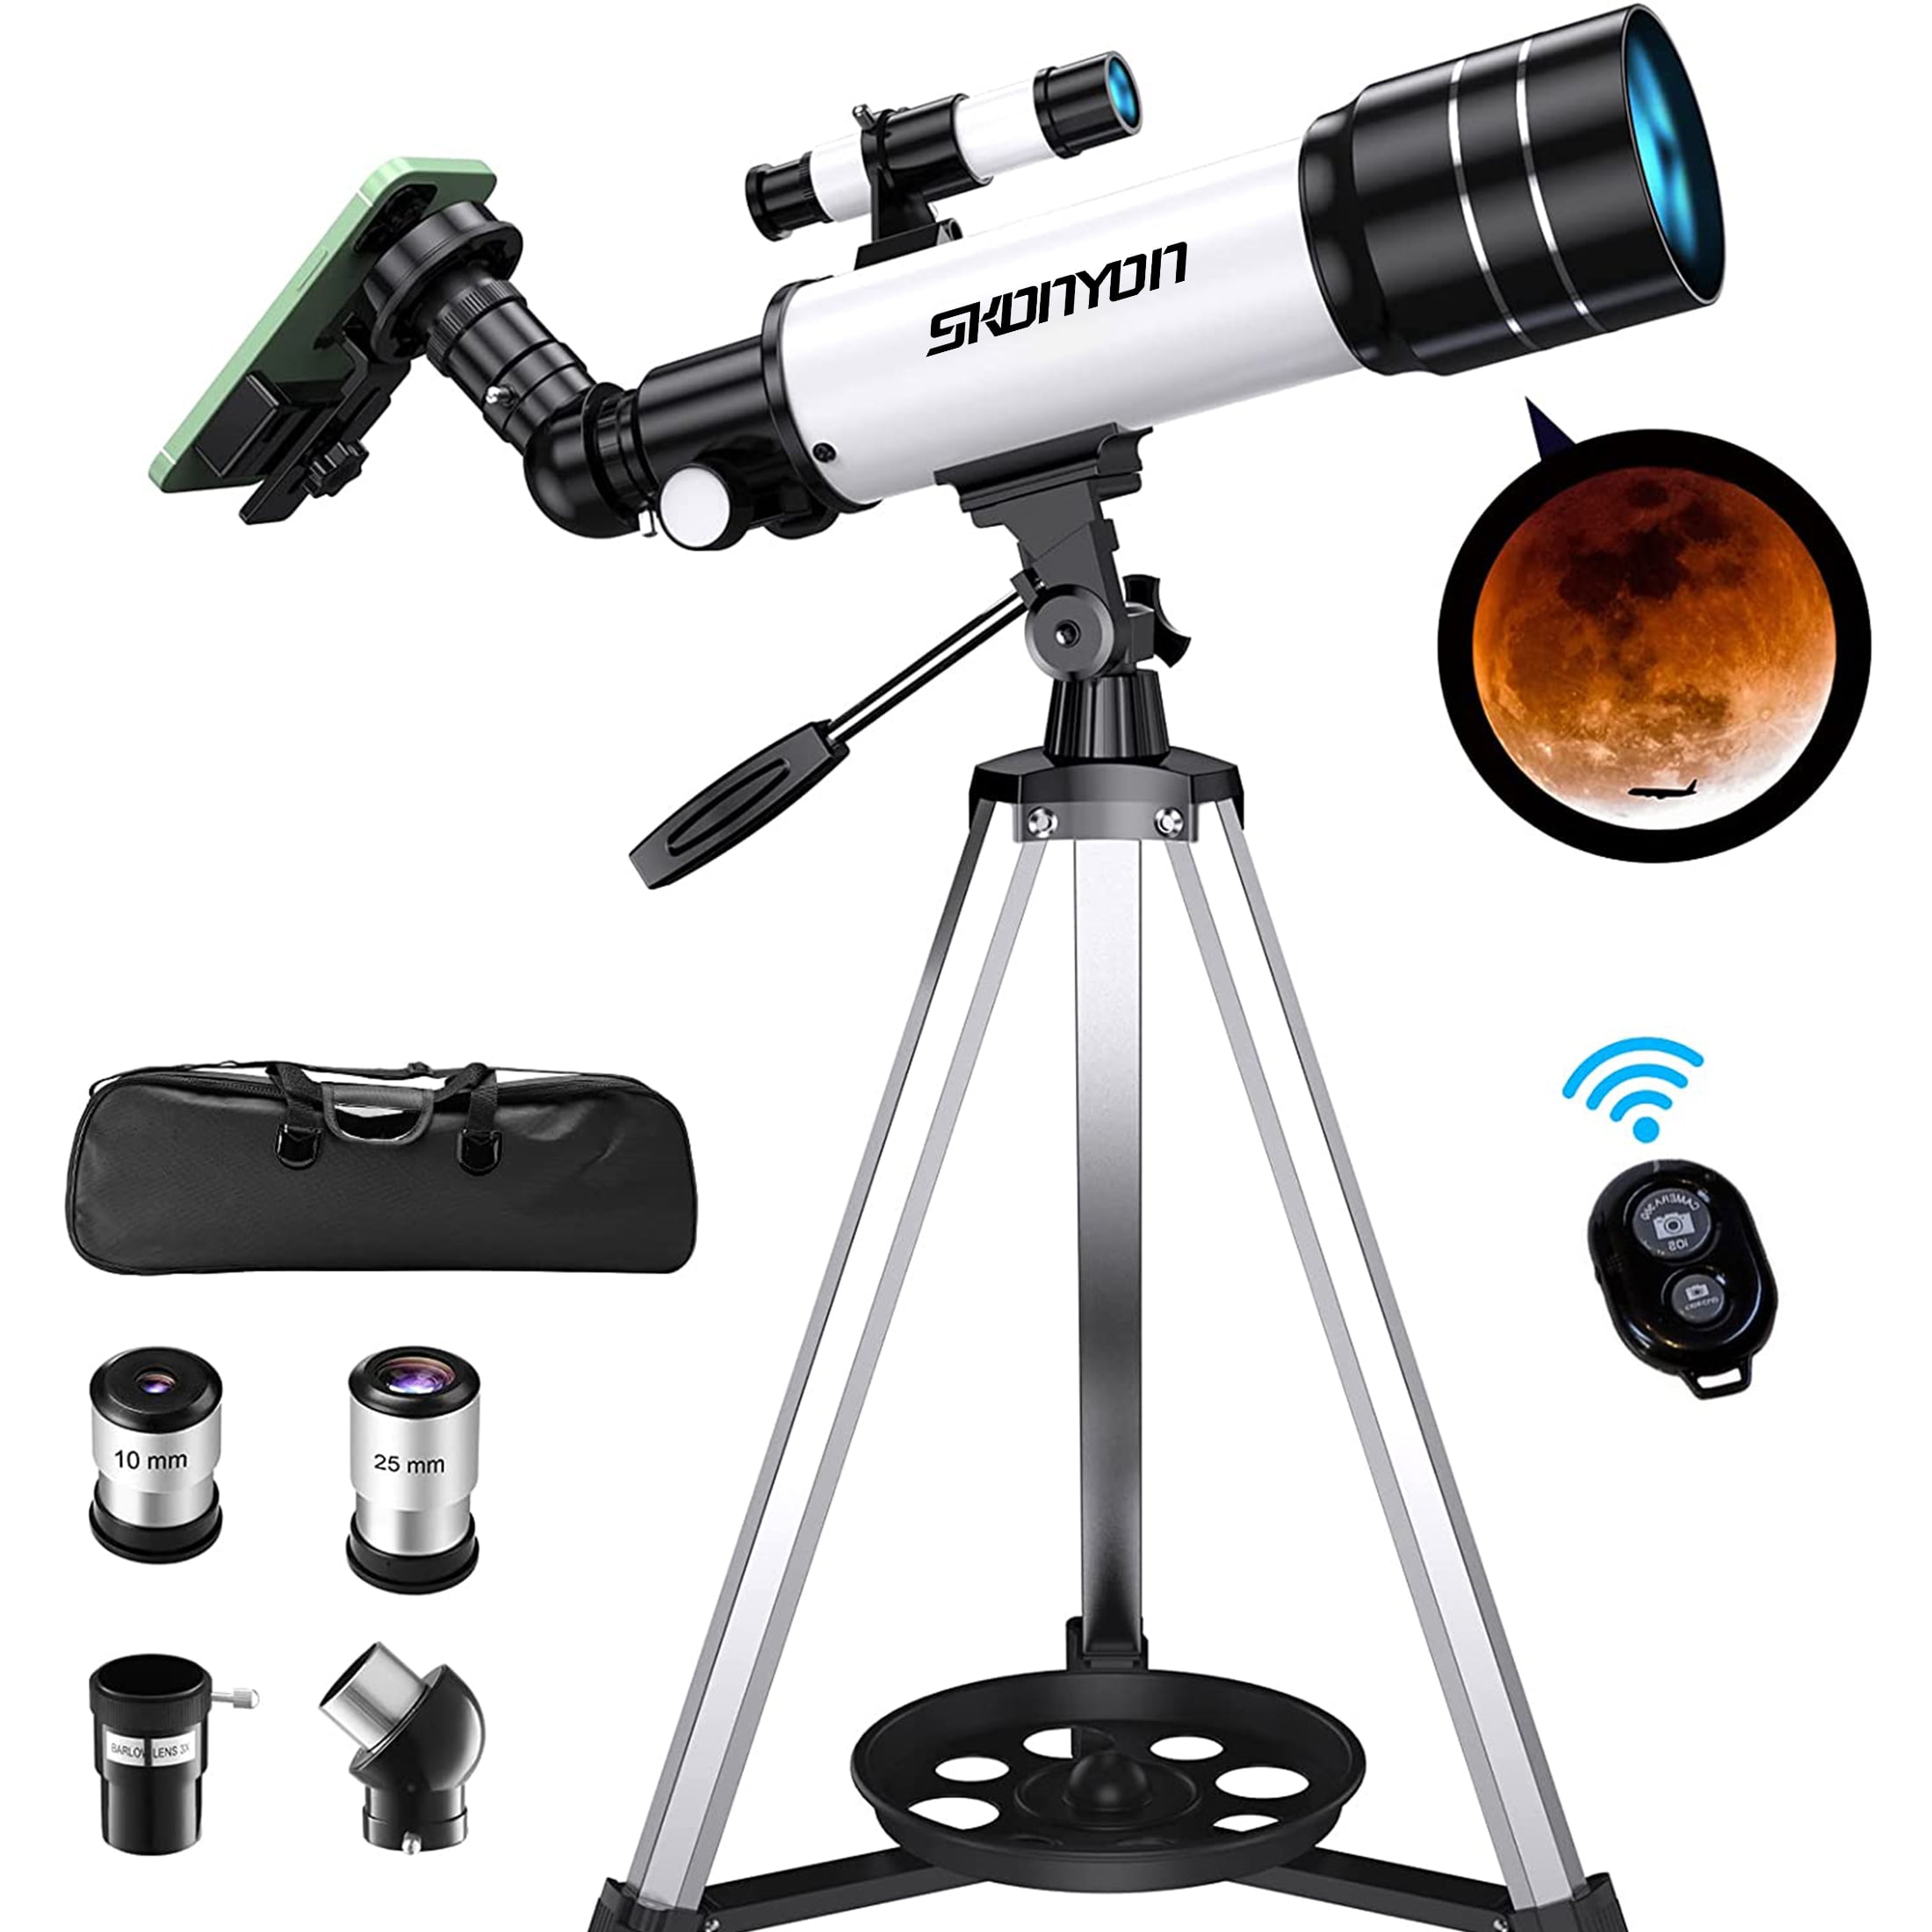 Telescope for Kids & Adults Day & Night Vision Refractor Telescope for Bird Watching Camping Astronomy Beginners Gifts 70mm Aperture 400mm Focal Length Monocular with Tripod & Finder Scope 